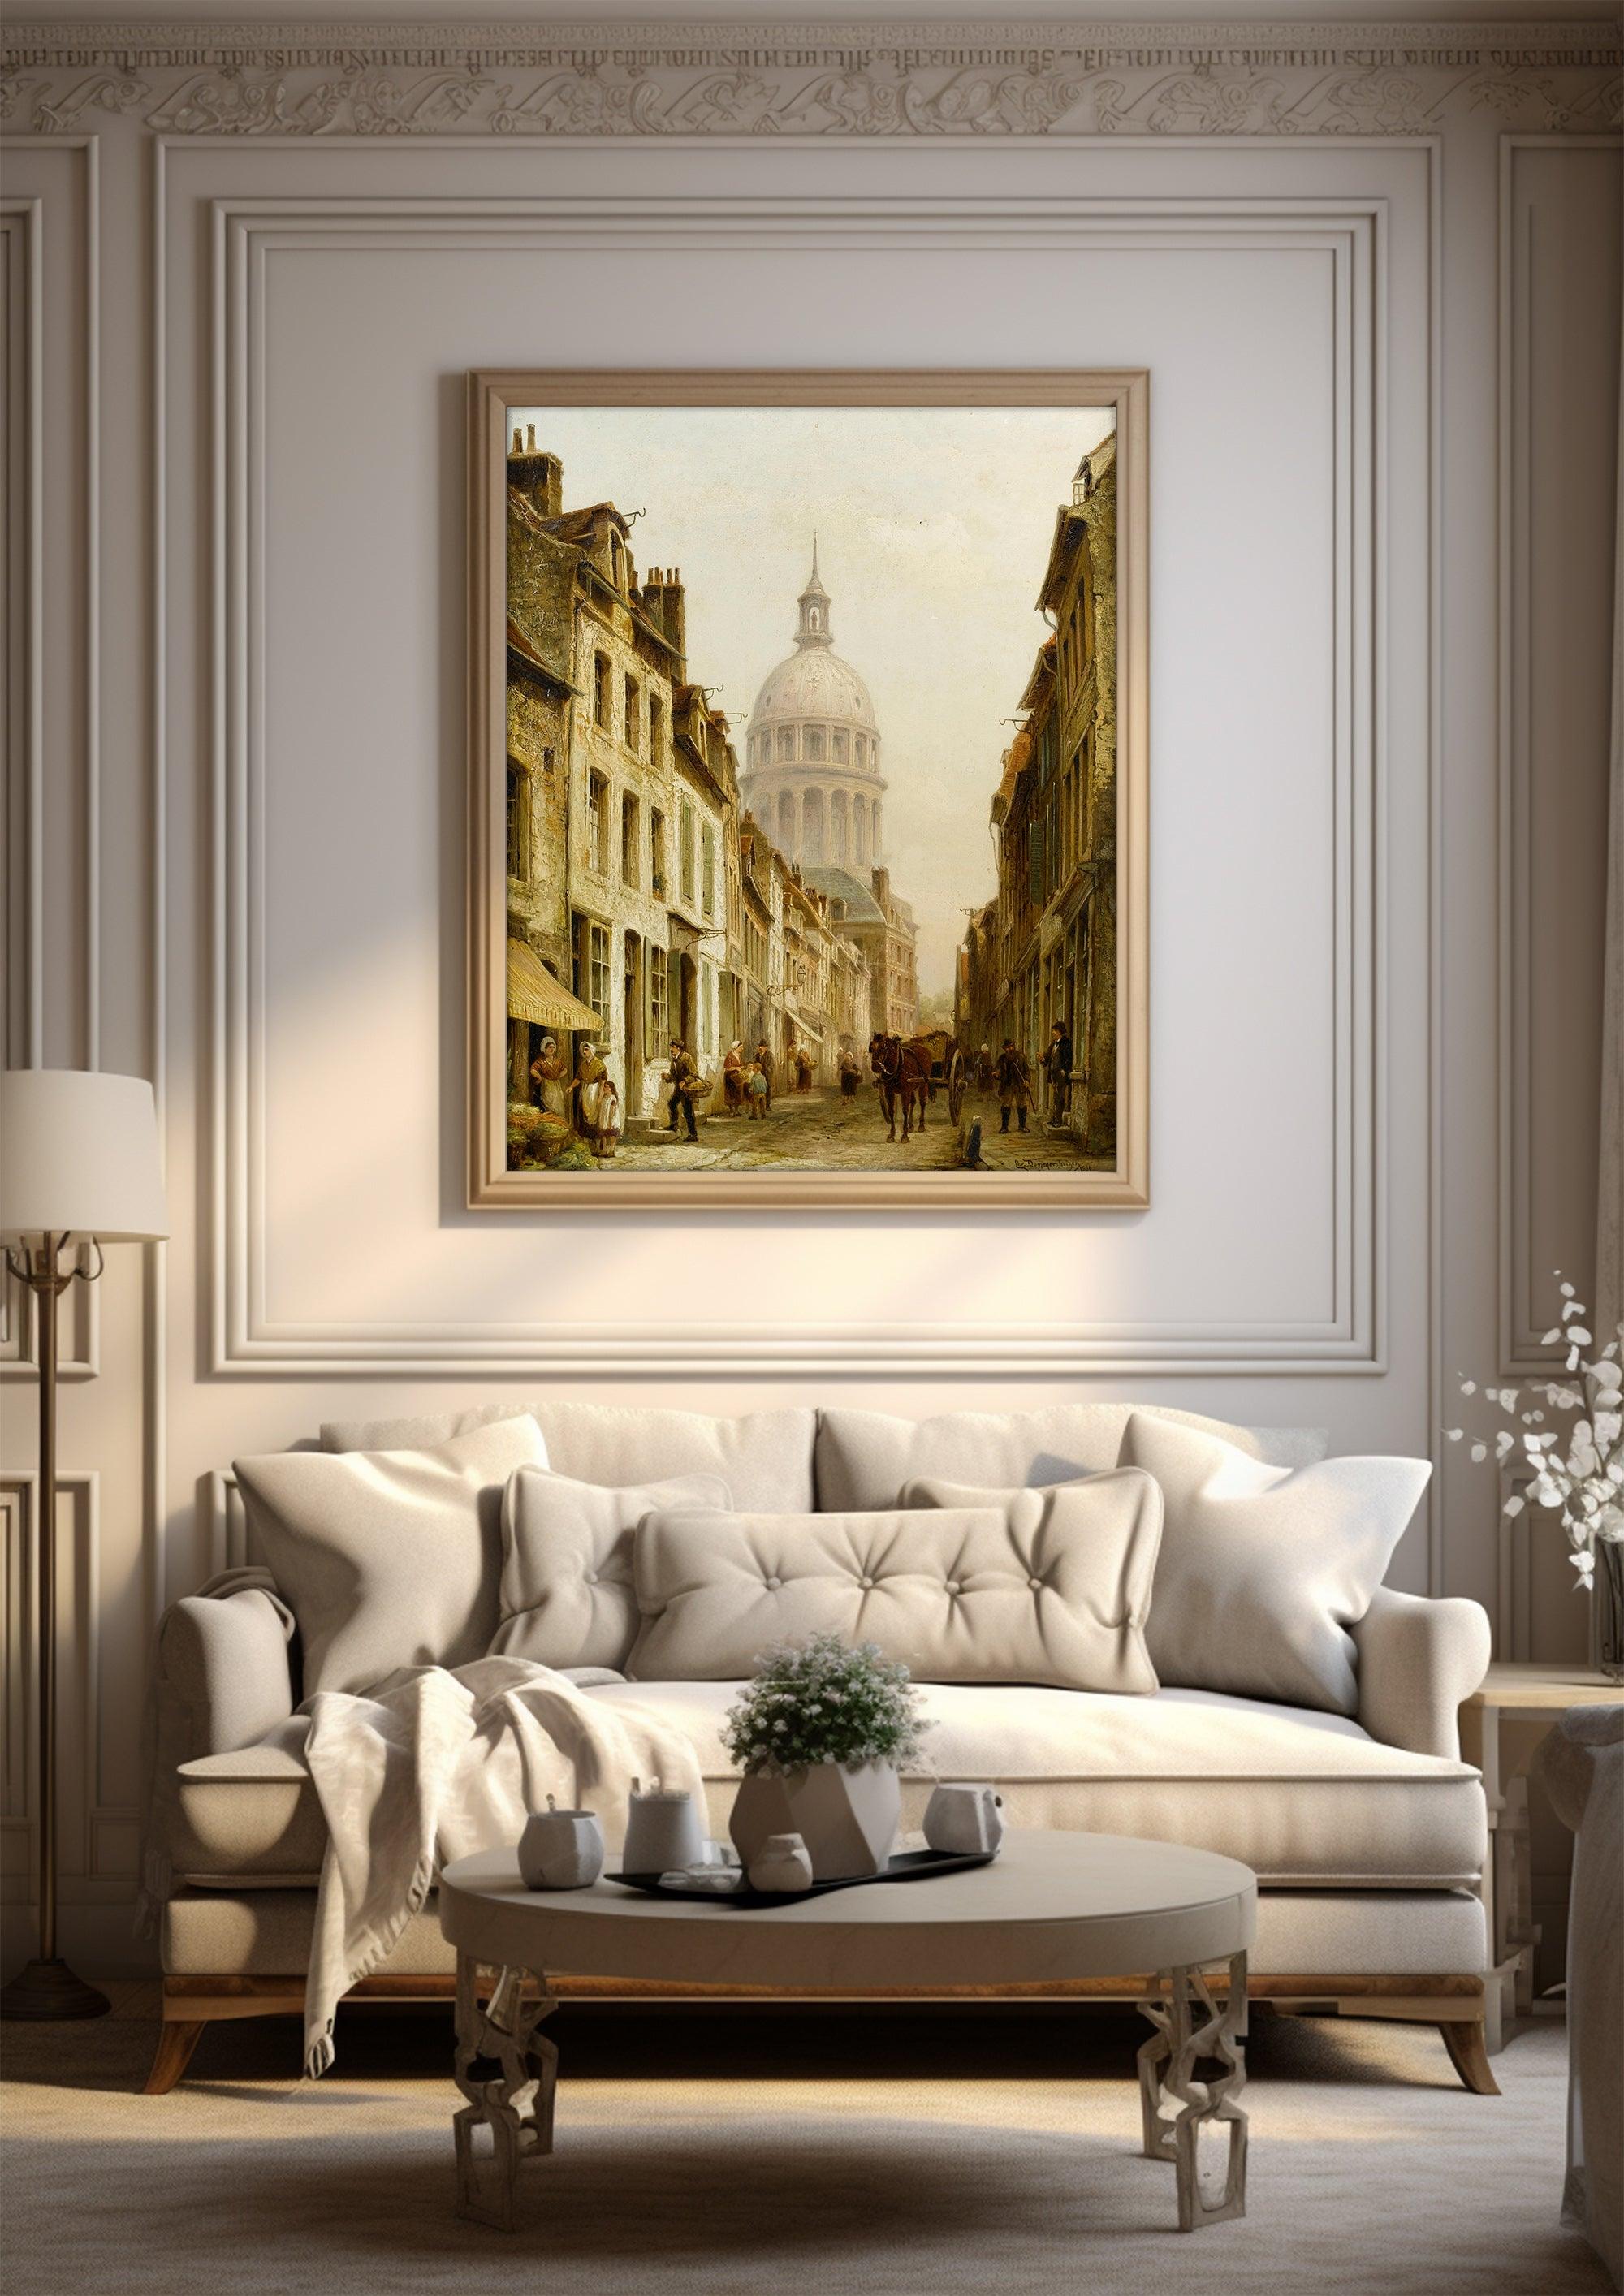 Architectural,Landscape Decorative Painting,Vintage Canvas Painting Prints,World Famous Paintings Series，Moody Wall Decor，High-Quality Waterproof Decorative Canvas Art,Hotel Aisle Living Room Home Decor Art,Giclée Printing Technique